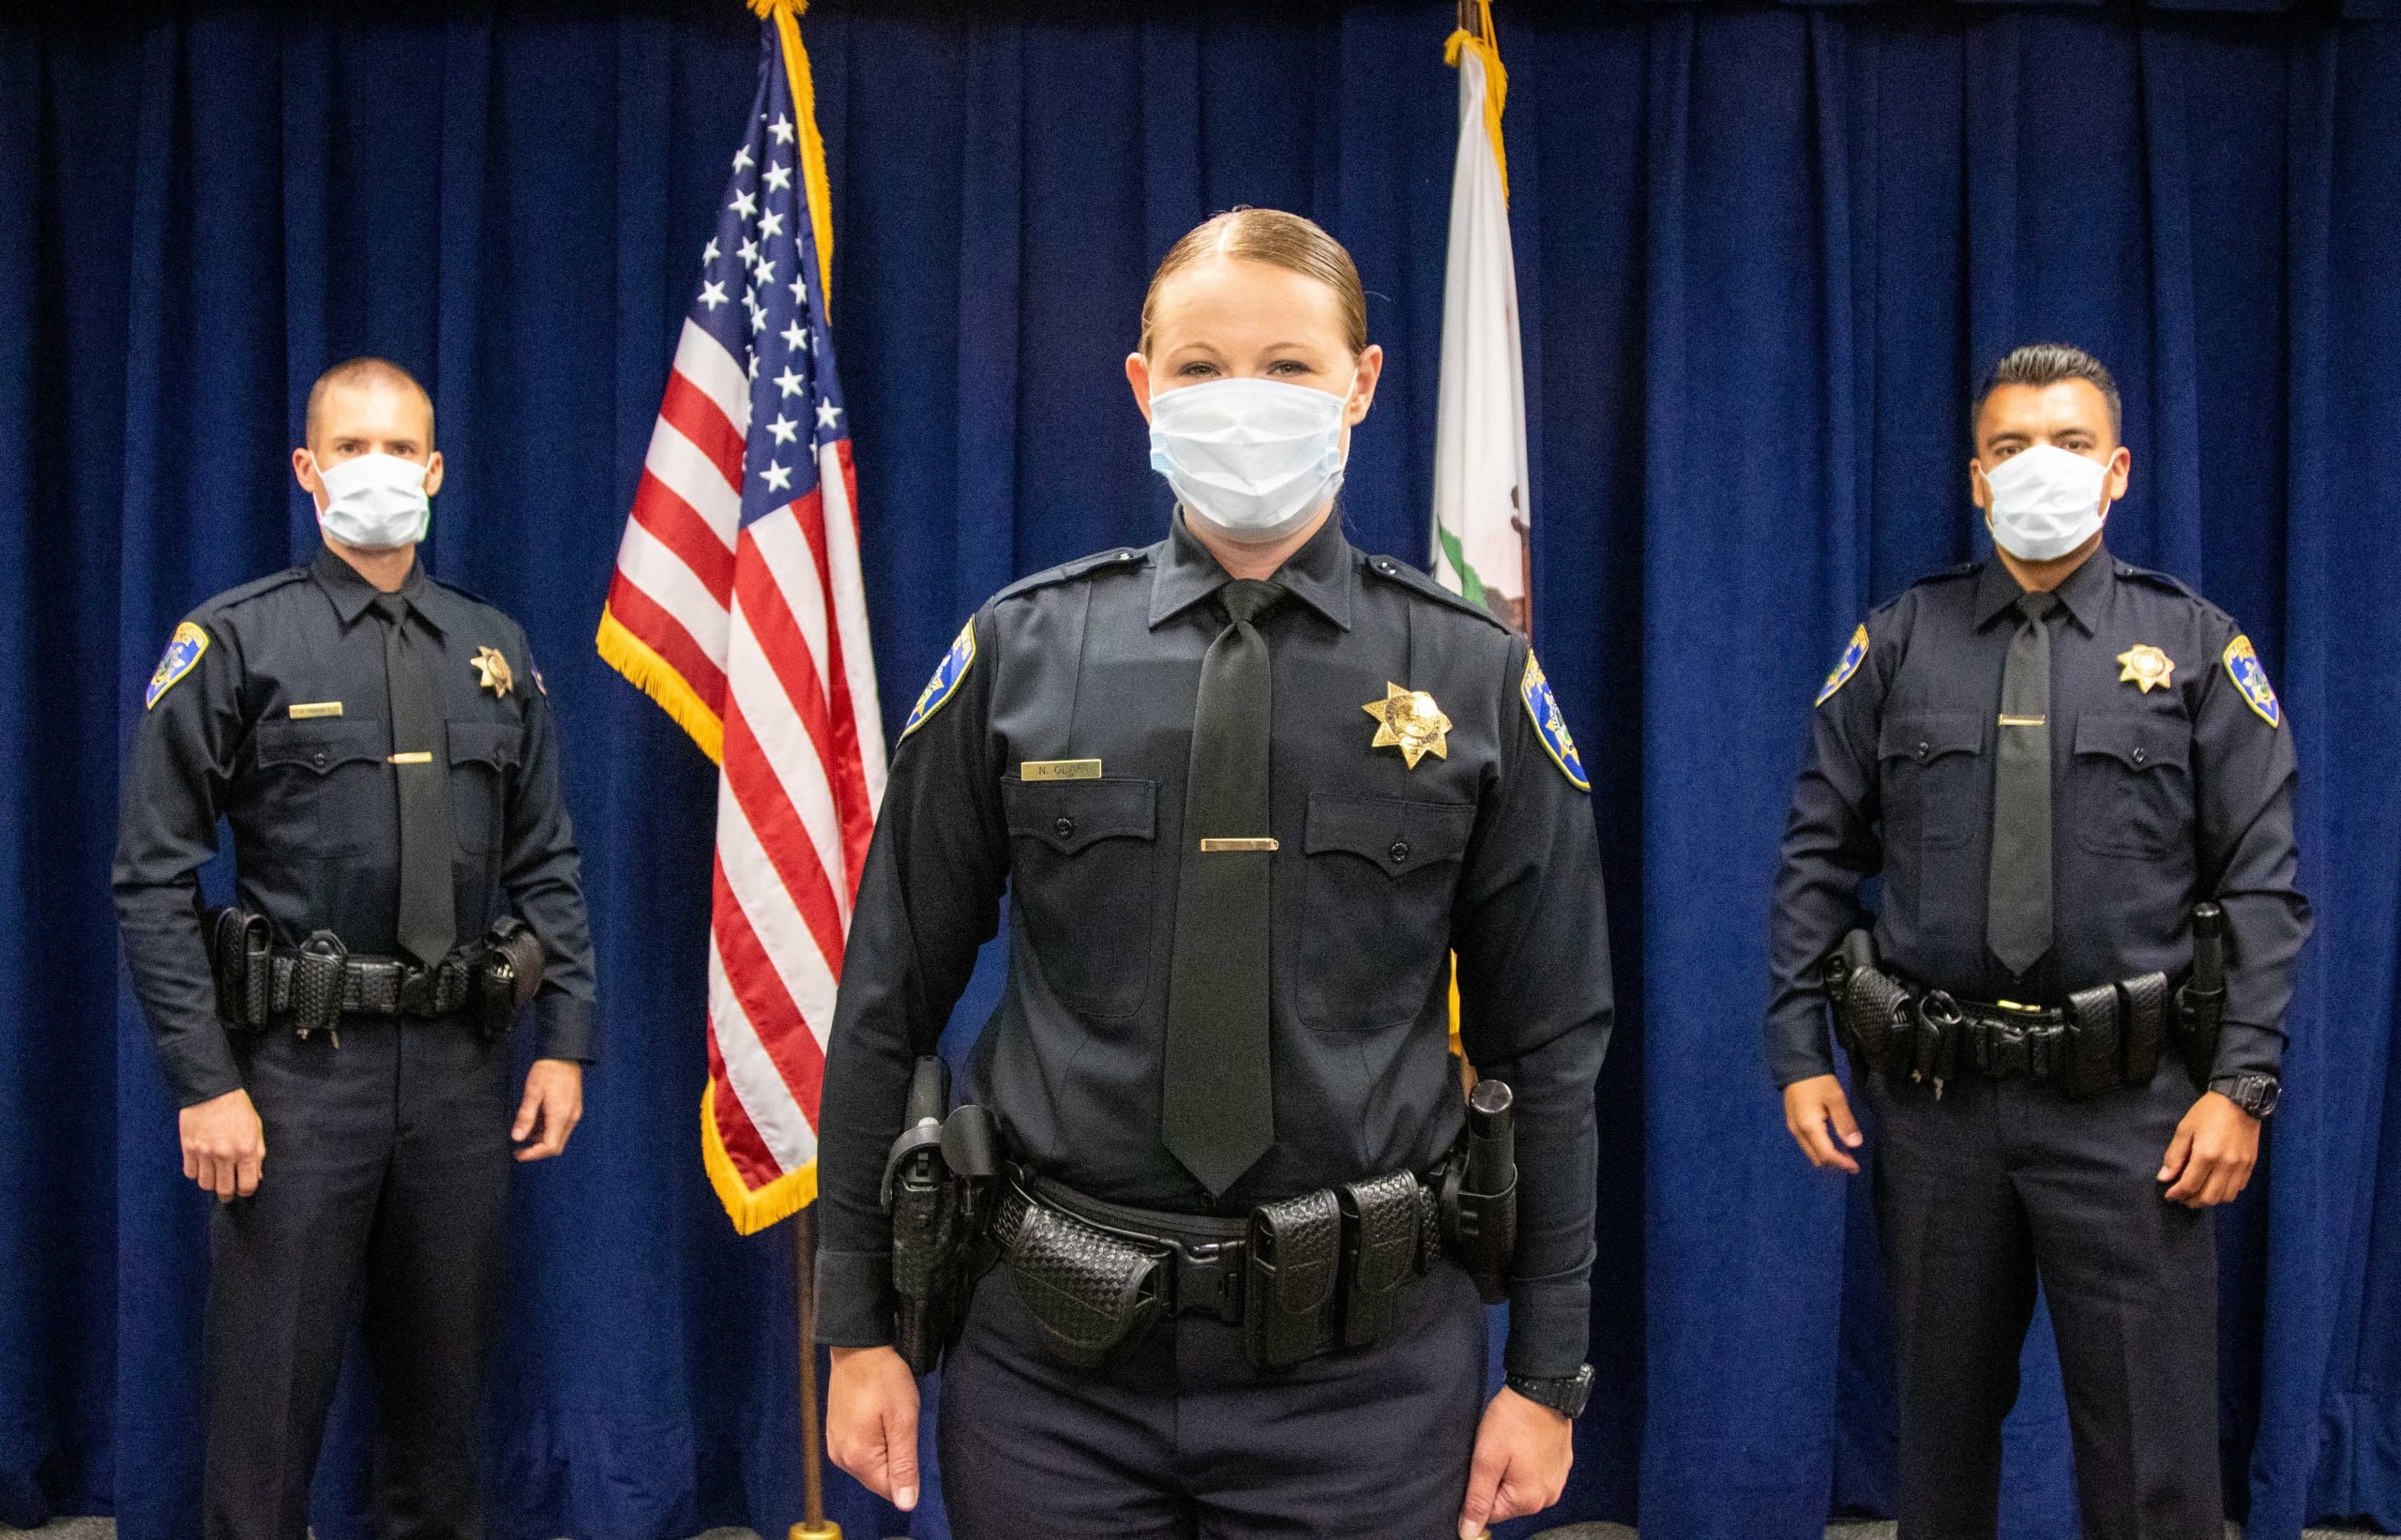 Pleasanton police welcome three new officers